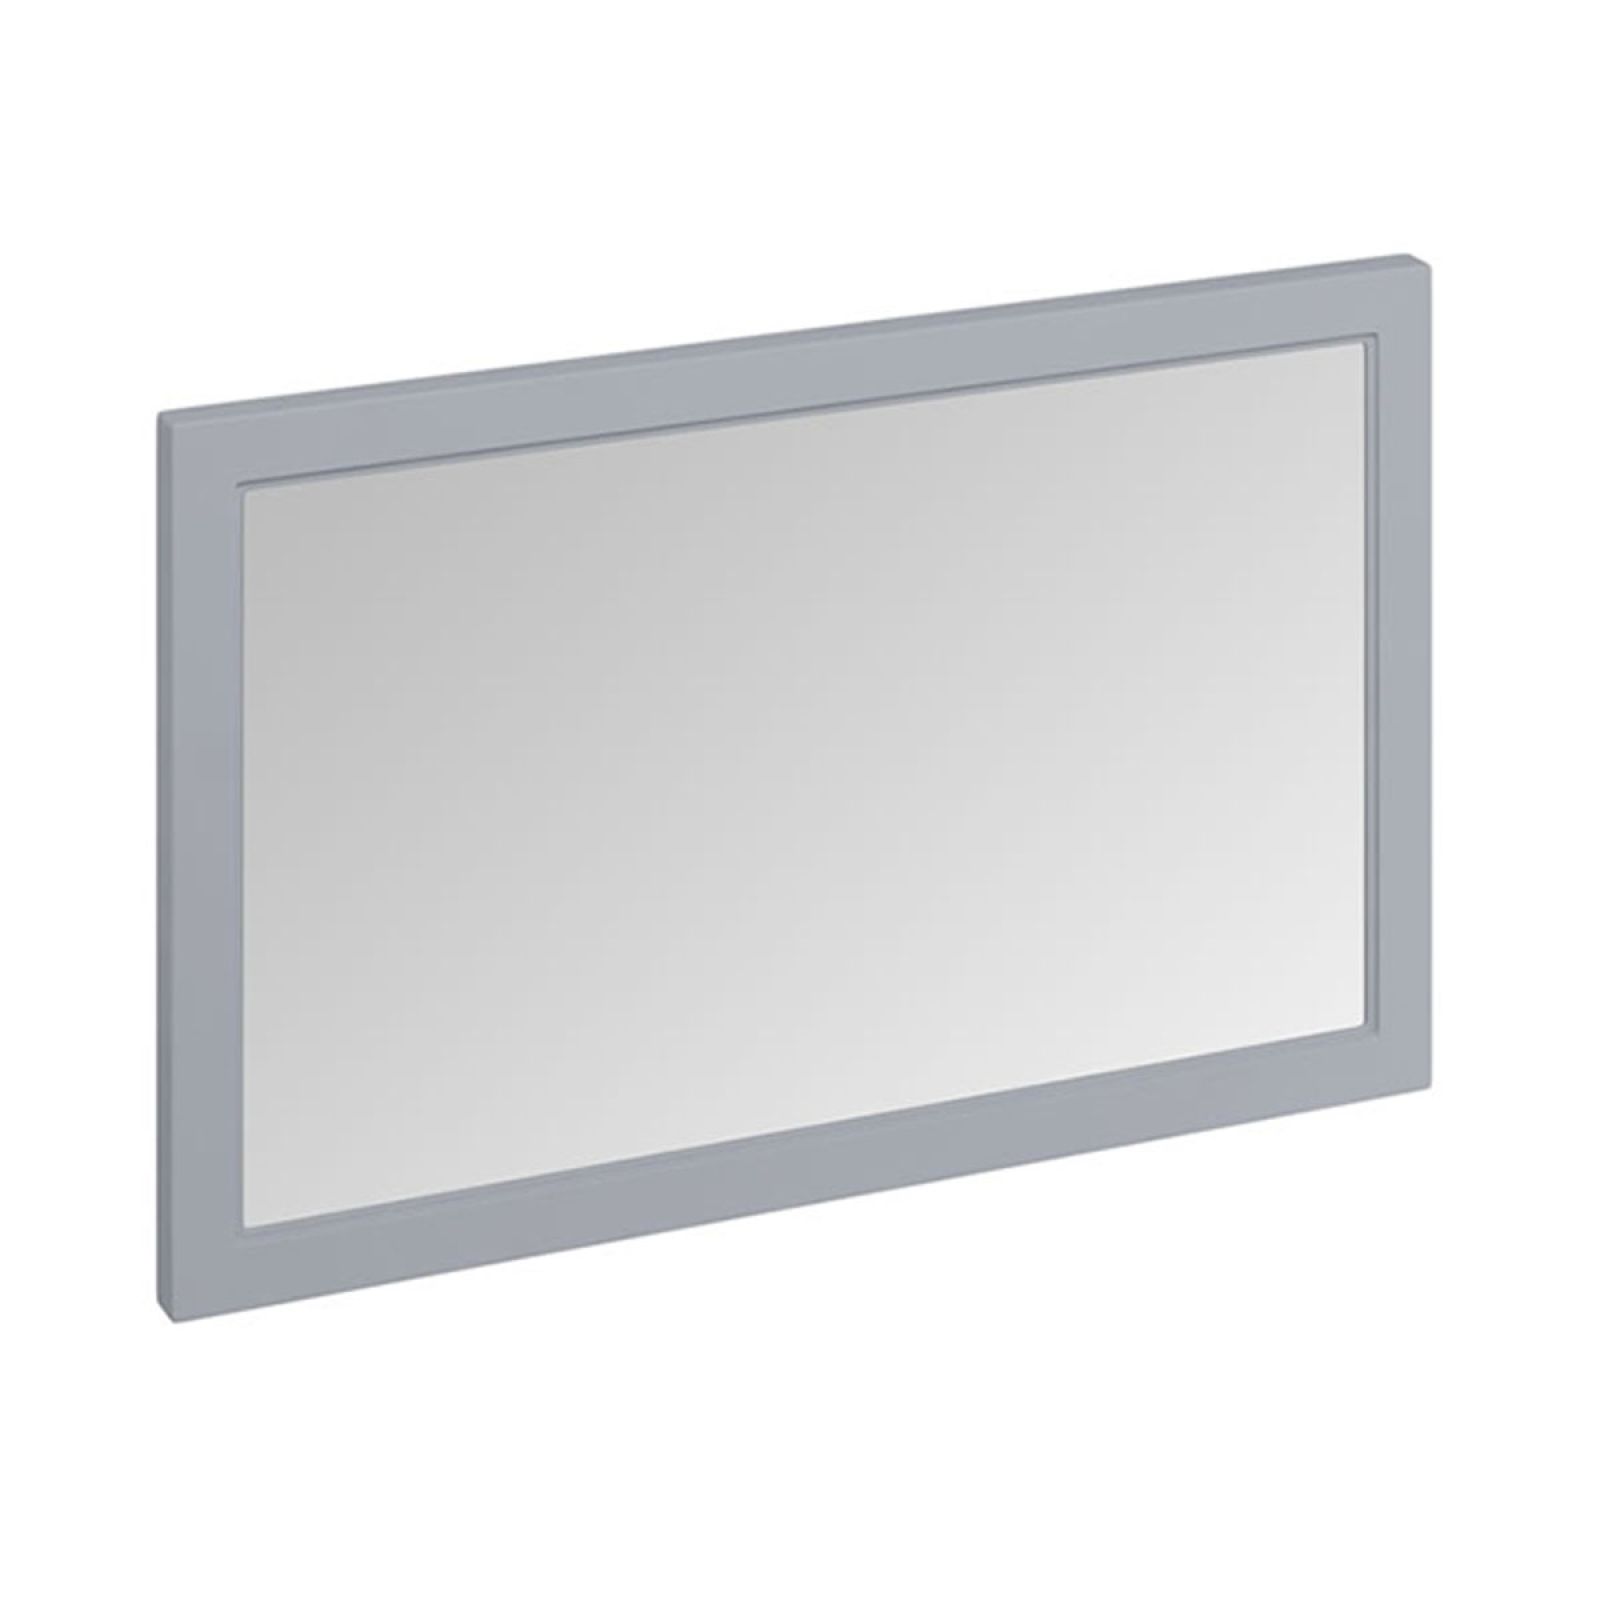 Framed 120cm Mirror in a choice of colours